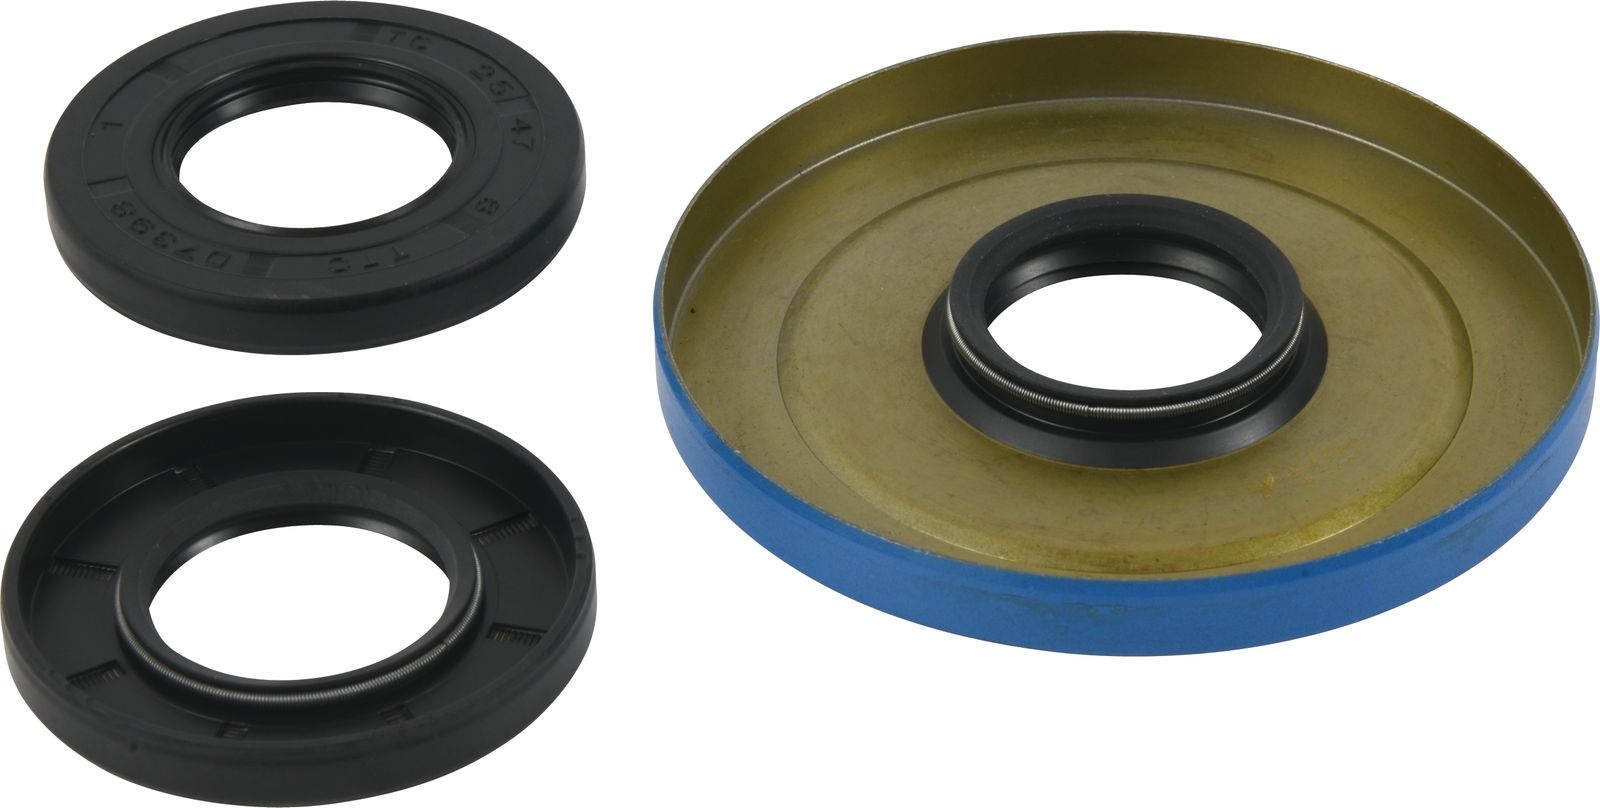 Wrp Diff Seal Kits - WRP252119-5 image